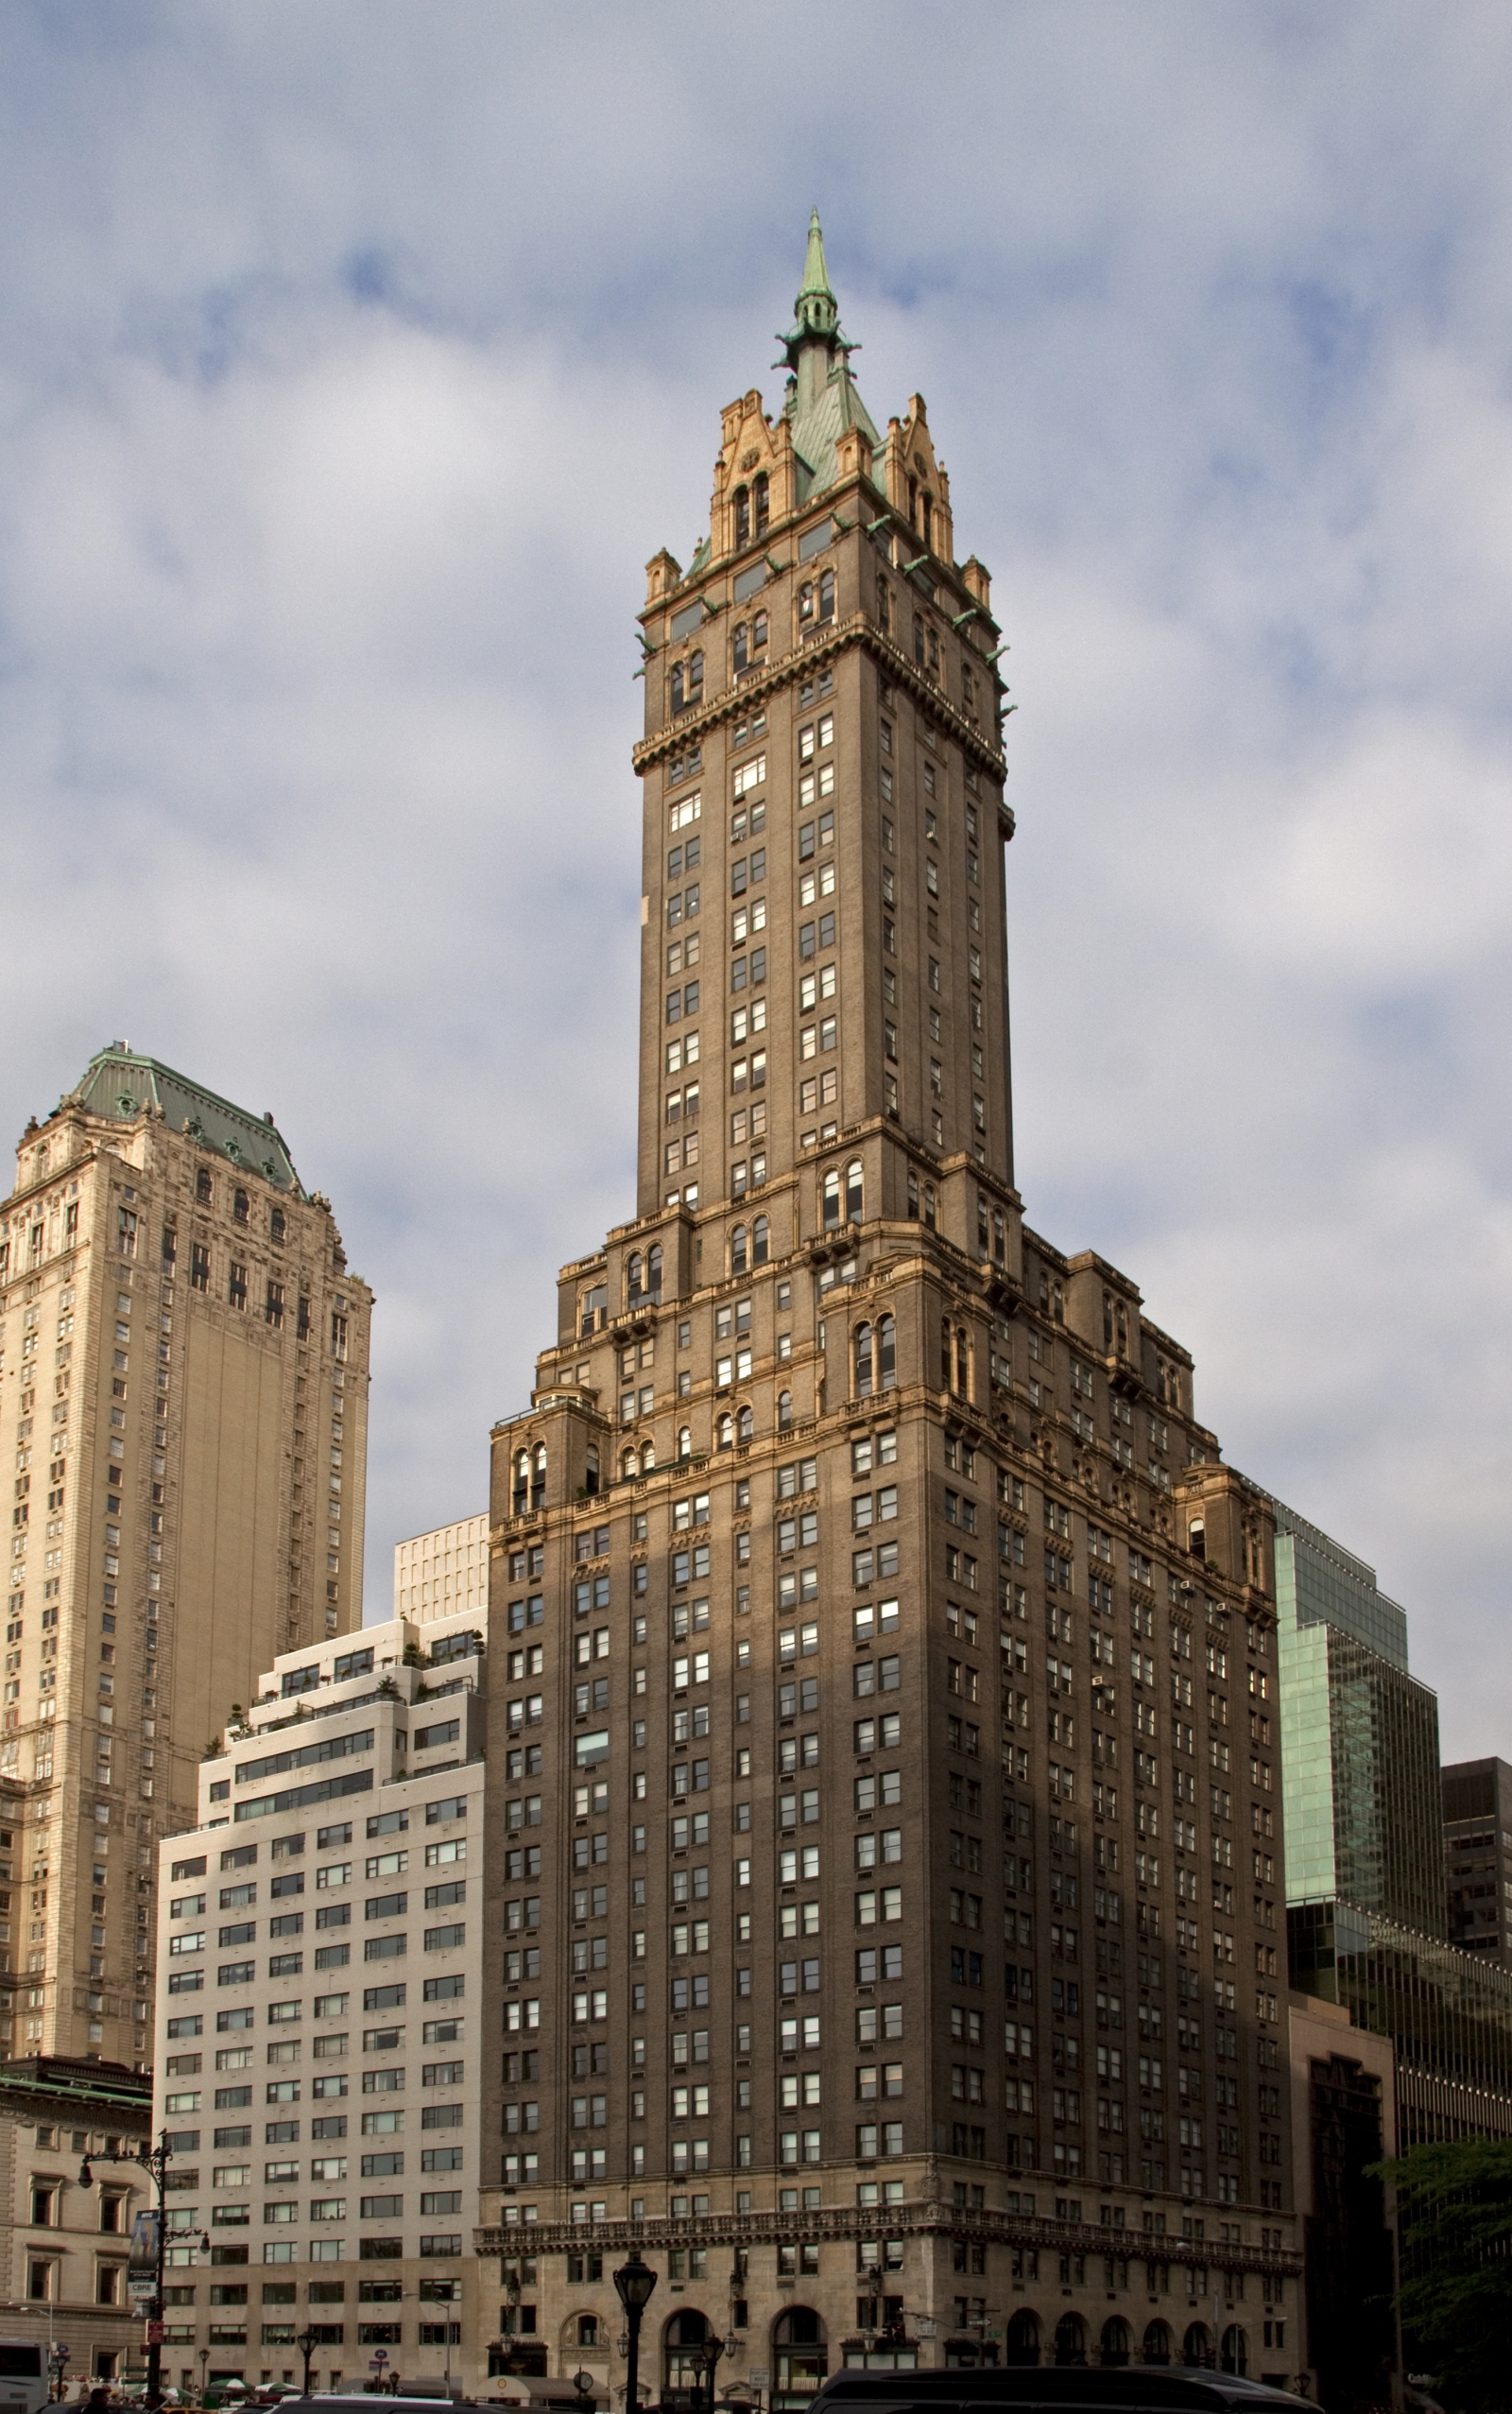 The Sherry Netherland building in New York City